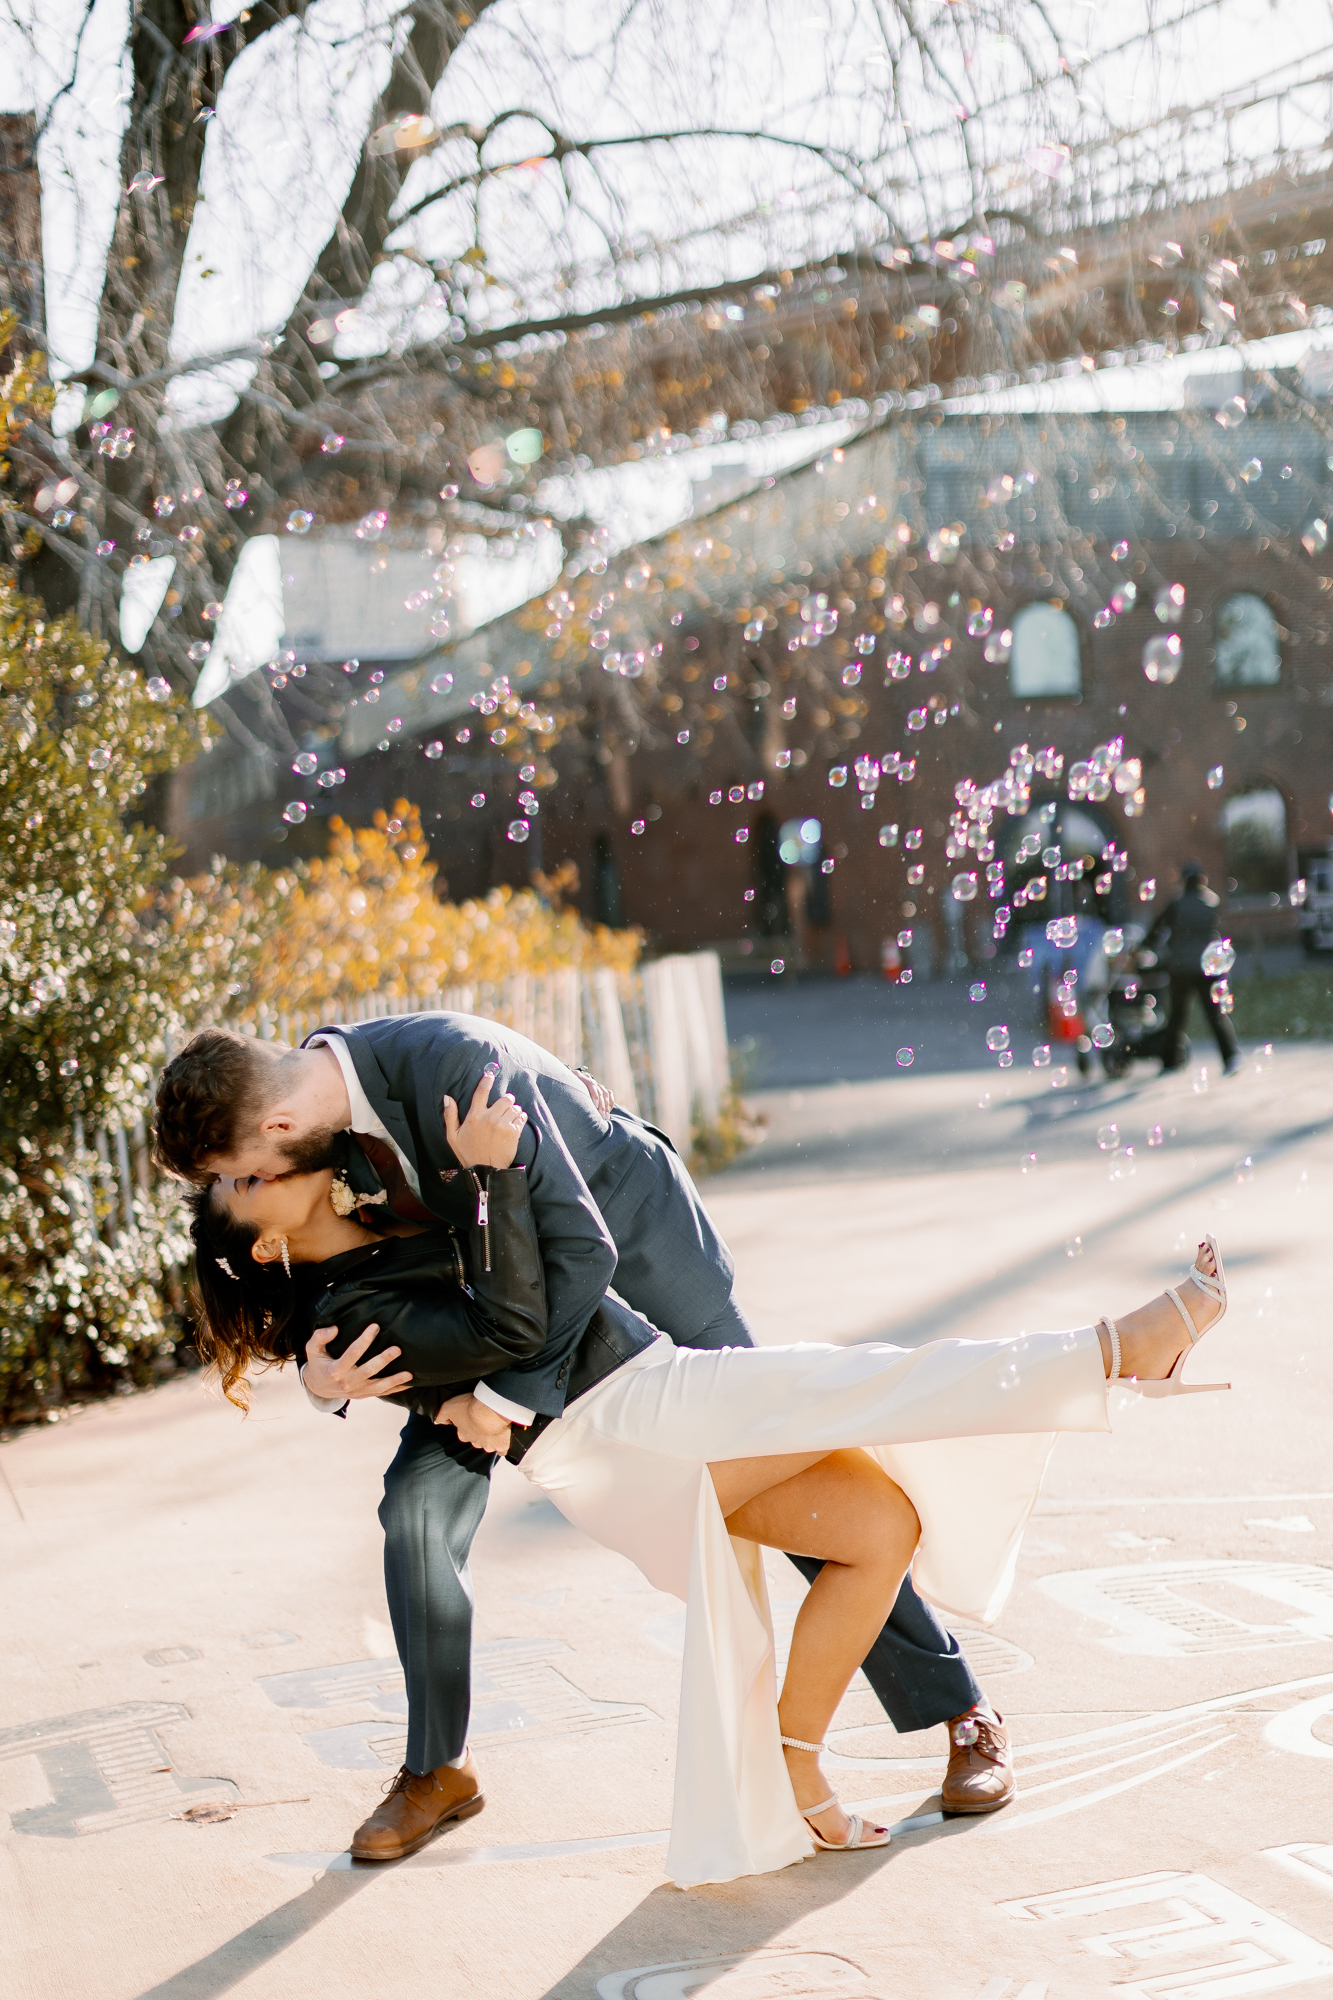 Candid Fall DUMBO Elopement with New York views and foliage